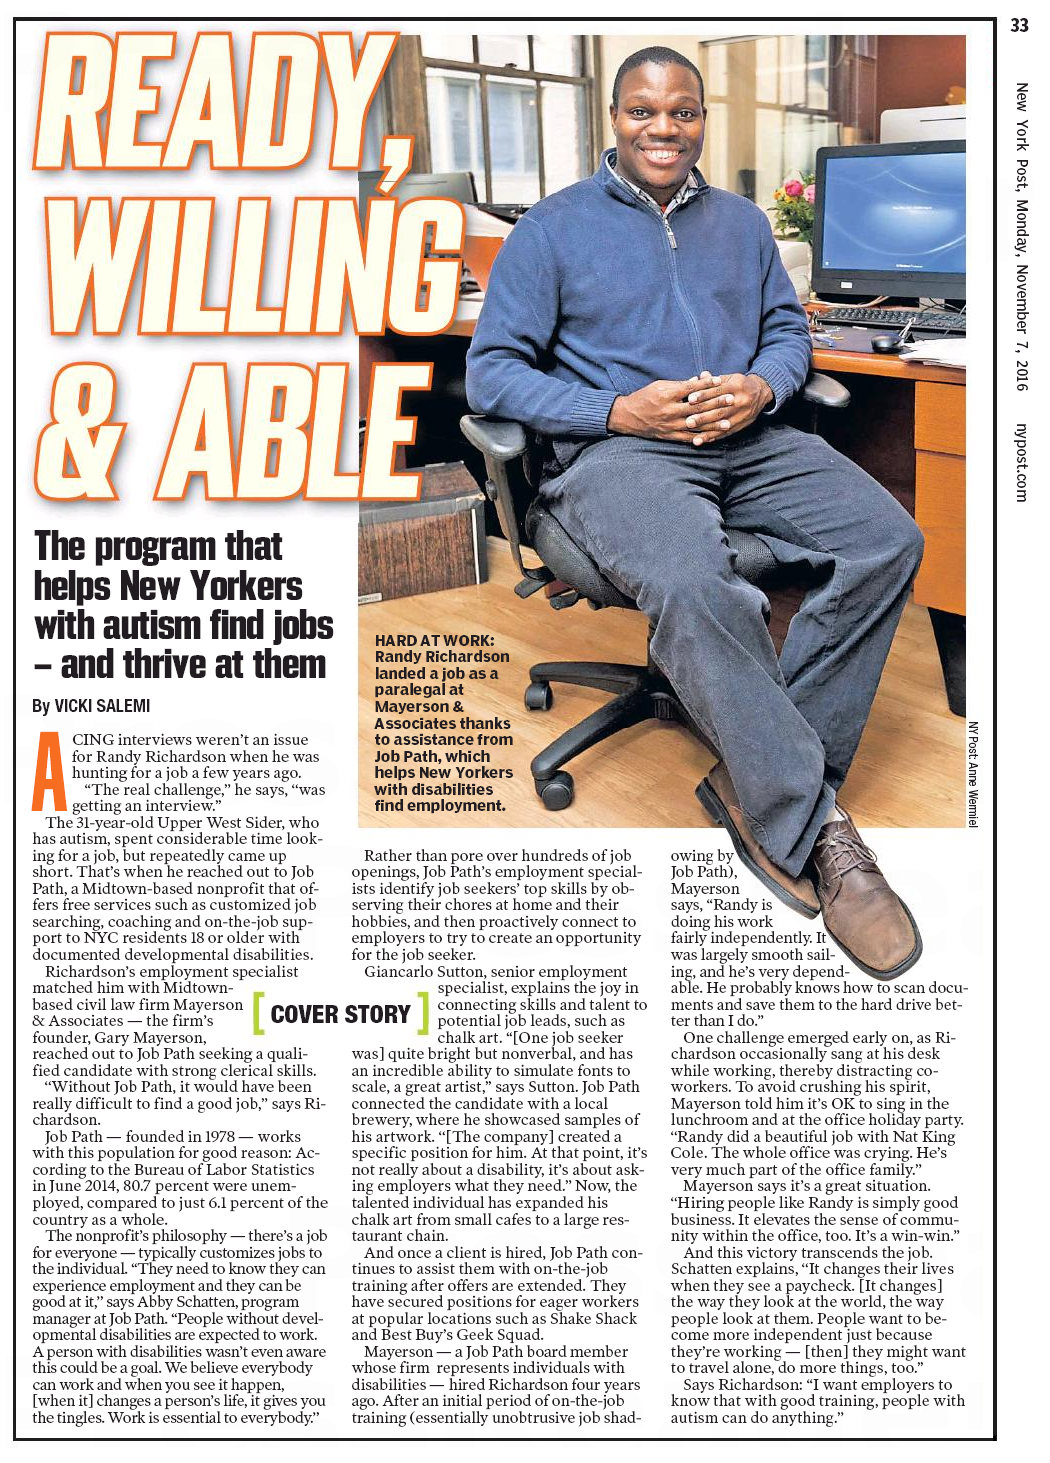 NY Post article about Job Path's employment program which includes photo of Randy at work